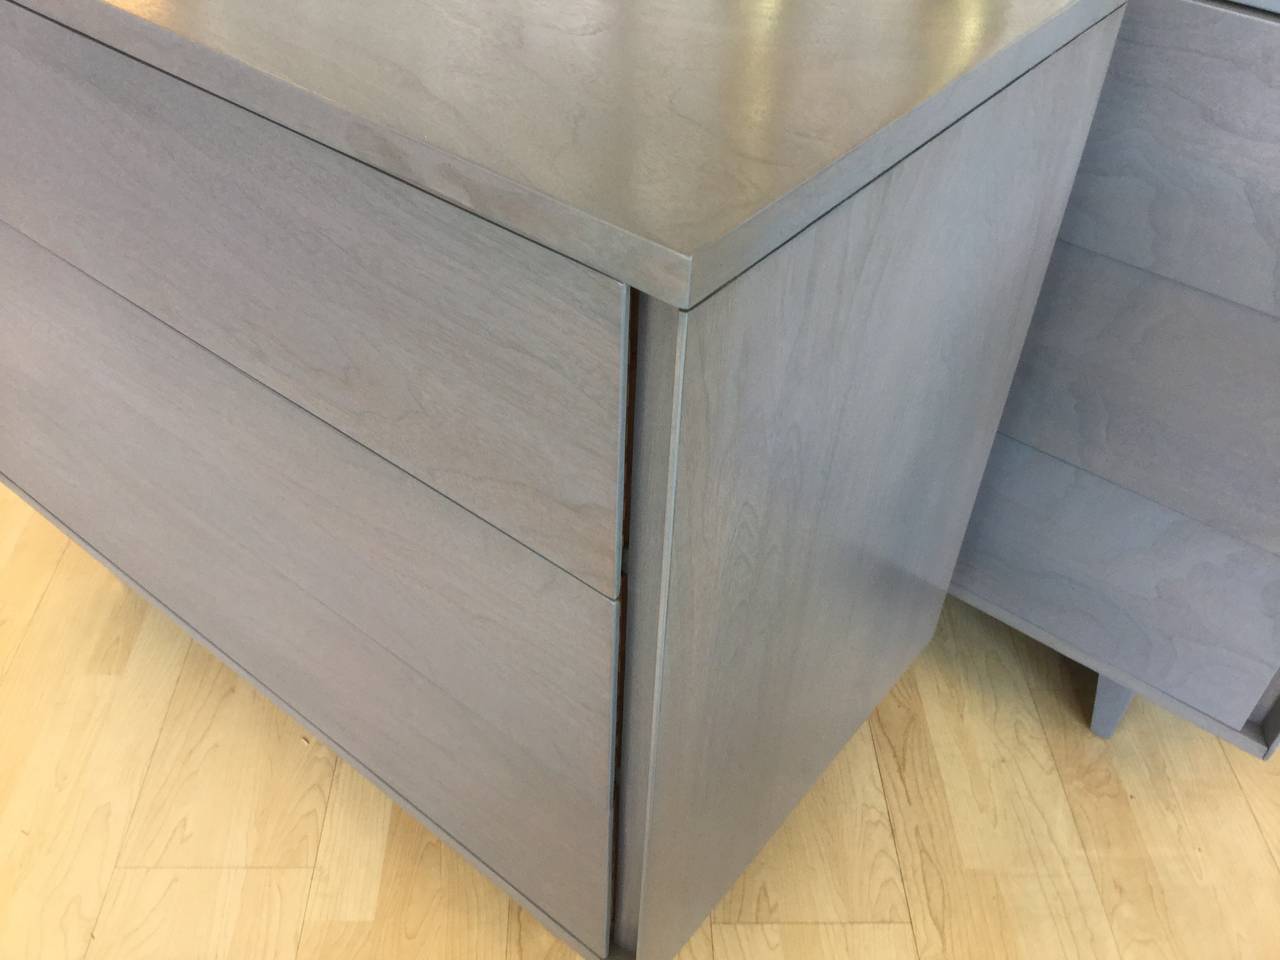 Pair of three drawer Dressers by John Stuart Inc. 
with integrated side pulls,
Gray cerused finish on walnut.
John Stuart Inc Metal tag in top drawers.